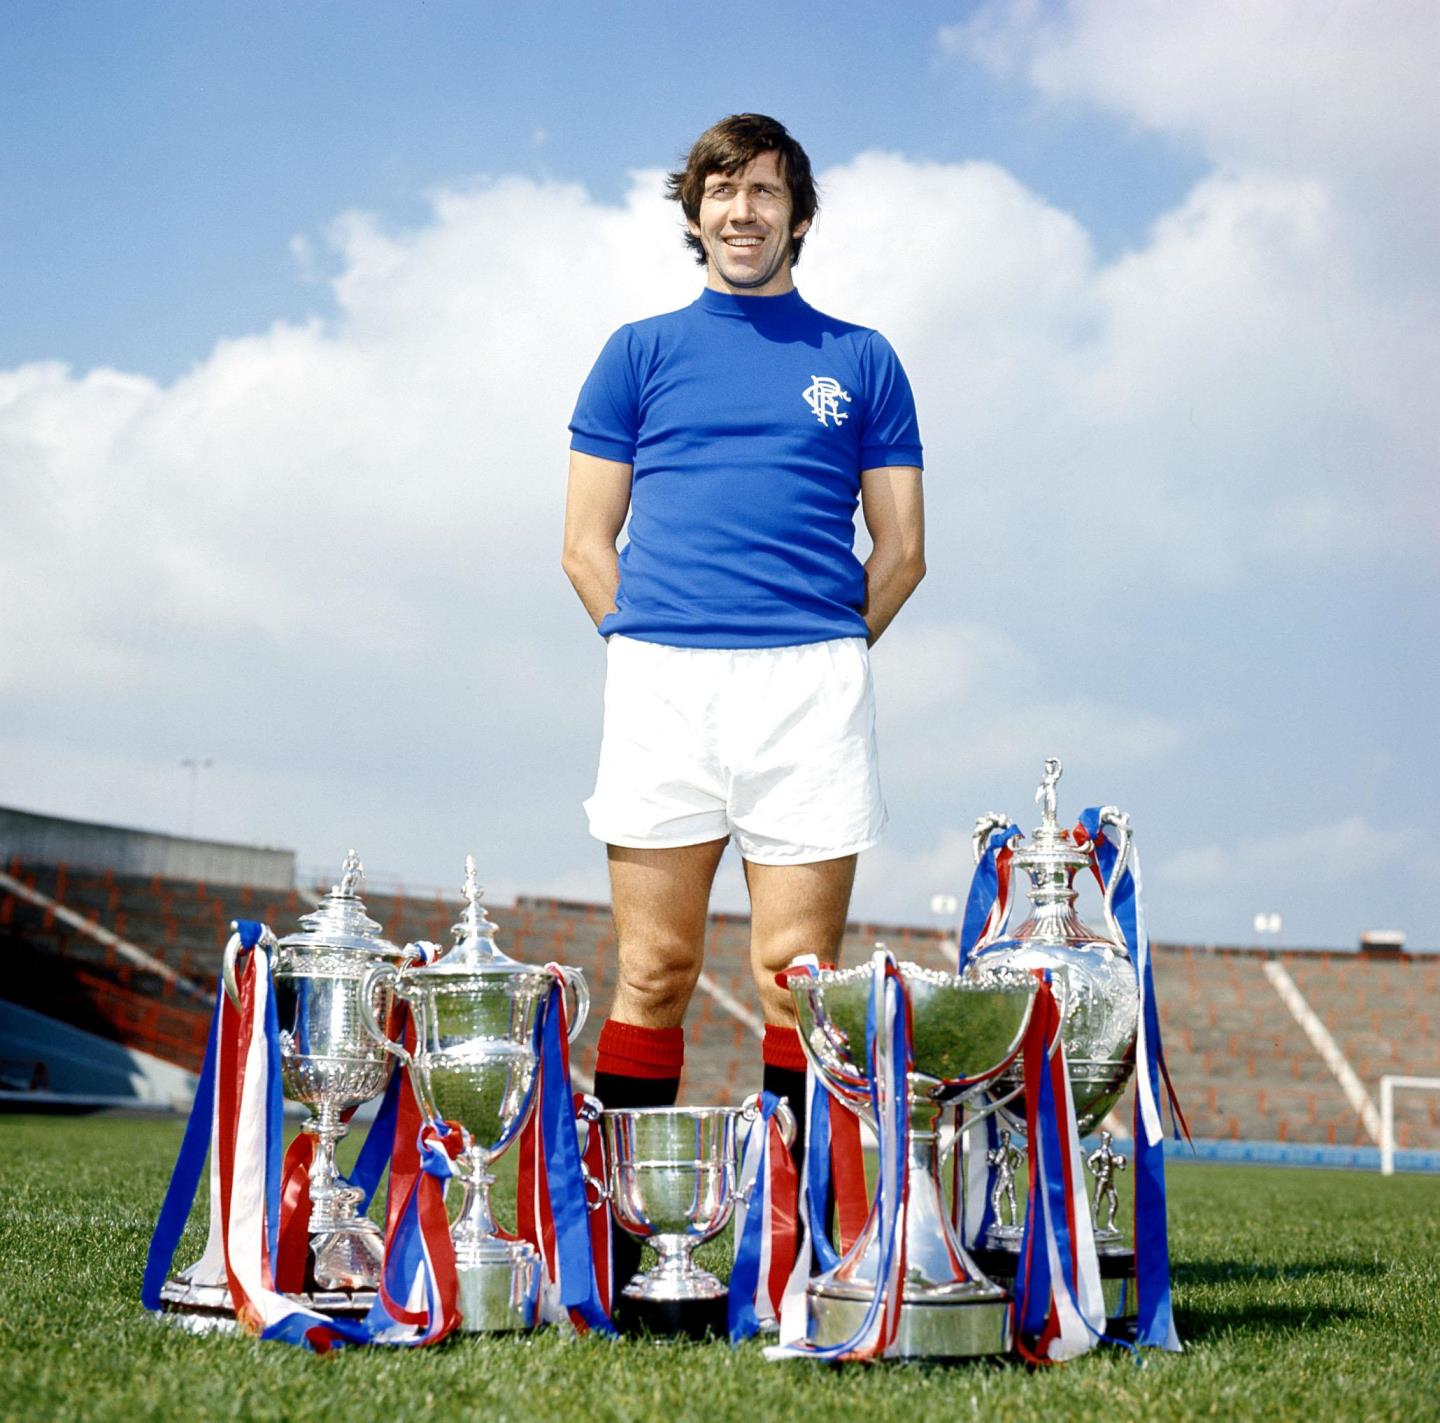 Rangers legend John Greig shows off his side's trophy haul at the beginning of the 1976-77 season.